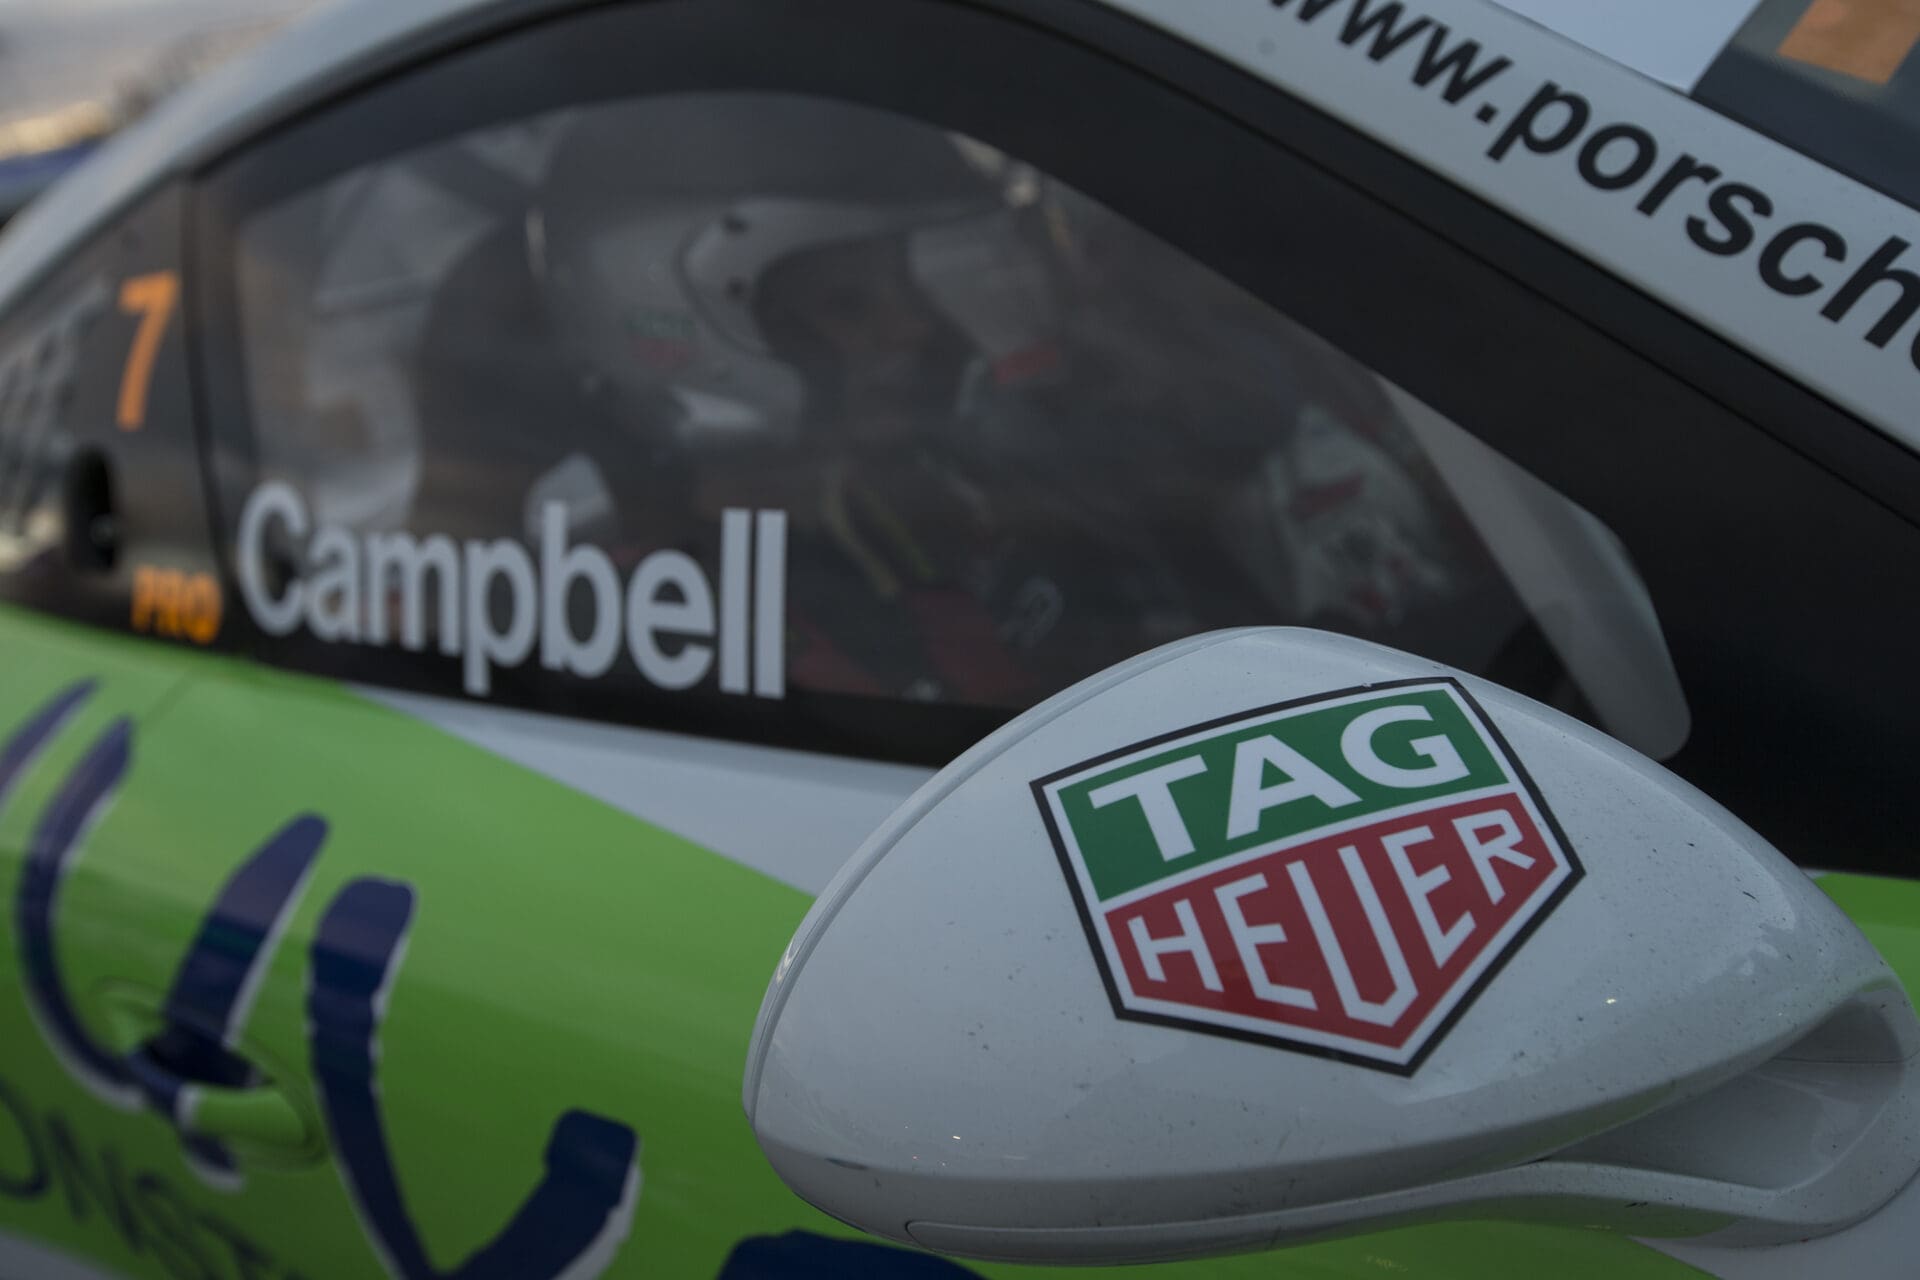 EVENT: Living the TAG Heuer life on a 250km/h ‘hot lap’ with young gun Matt Campbell